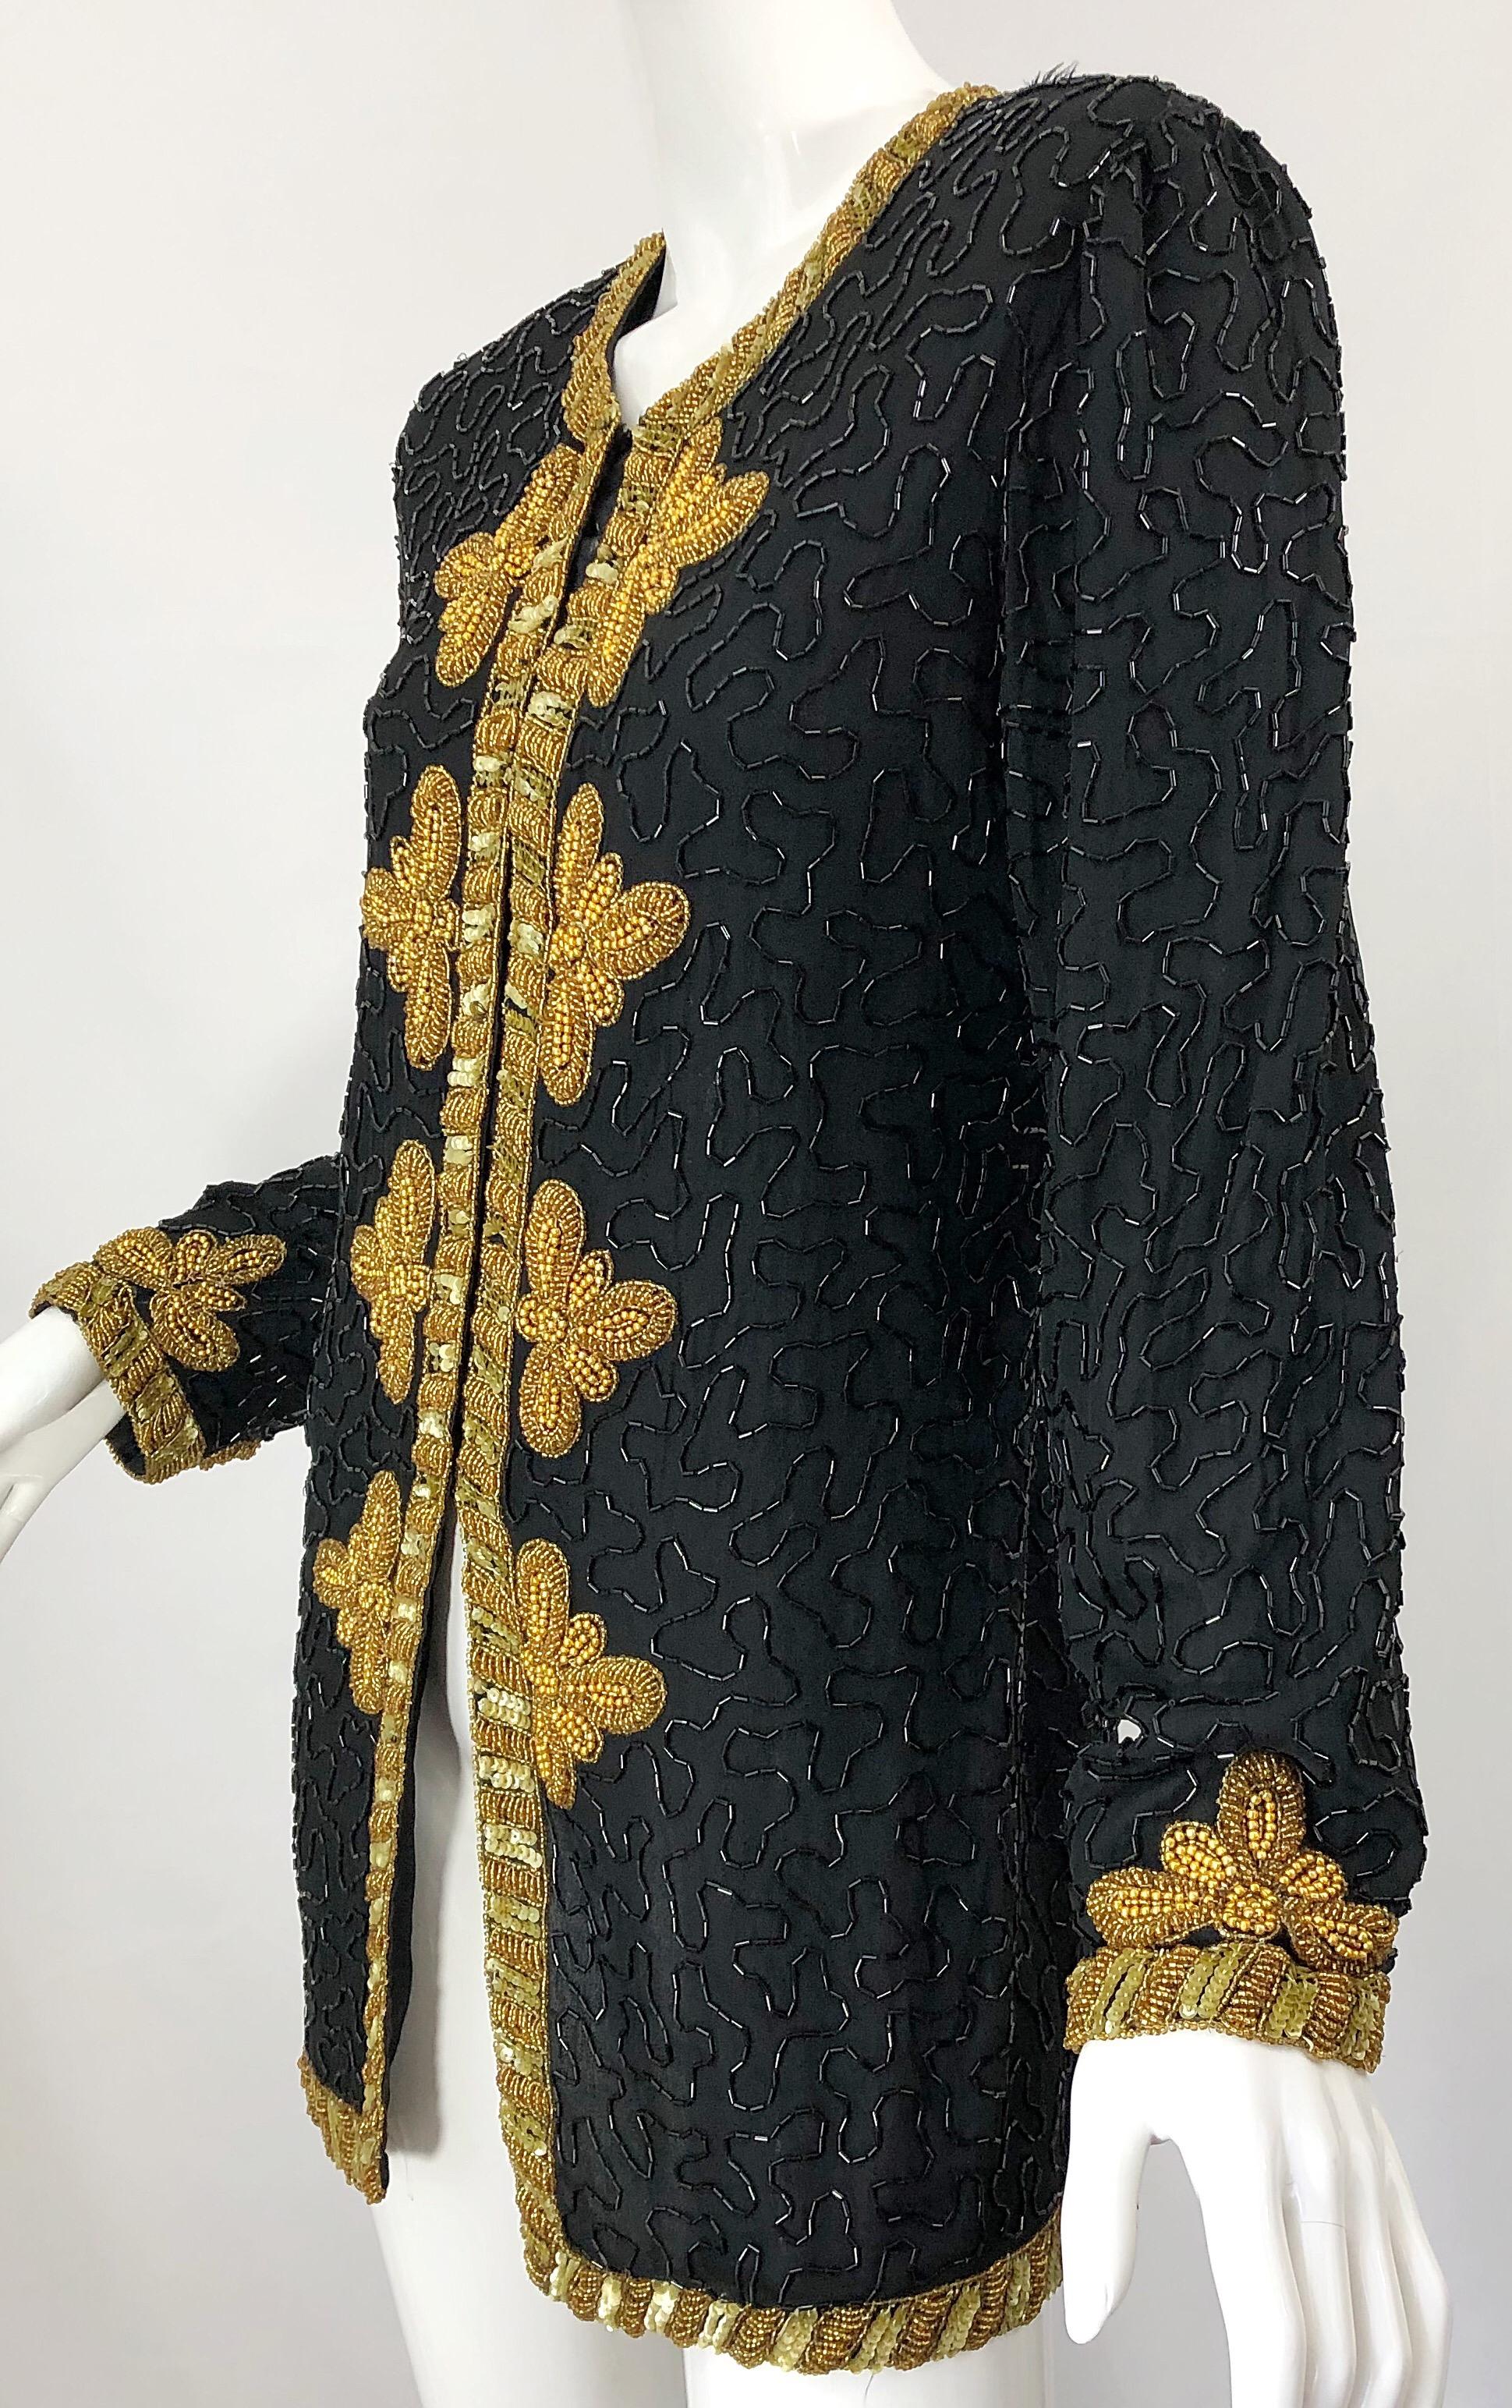 1990s Size Large Black and Gold Beaded Vintage Silk Chiffon 90s Jacket Top 8